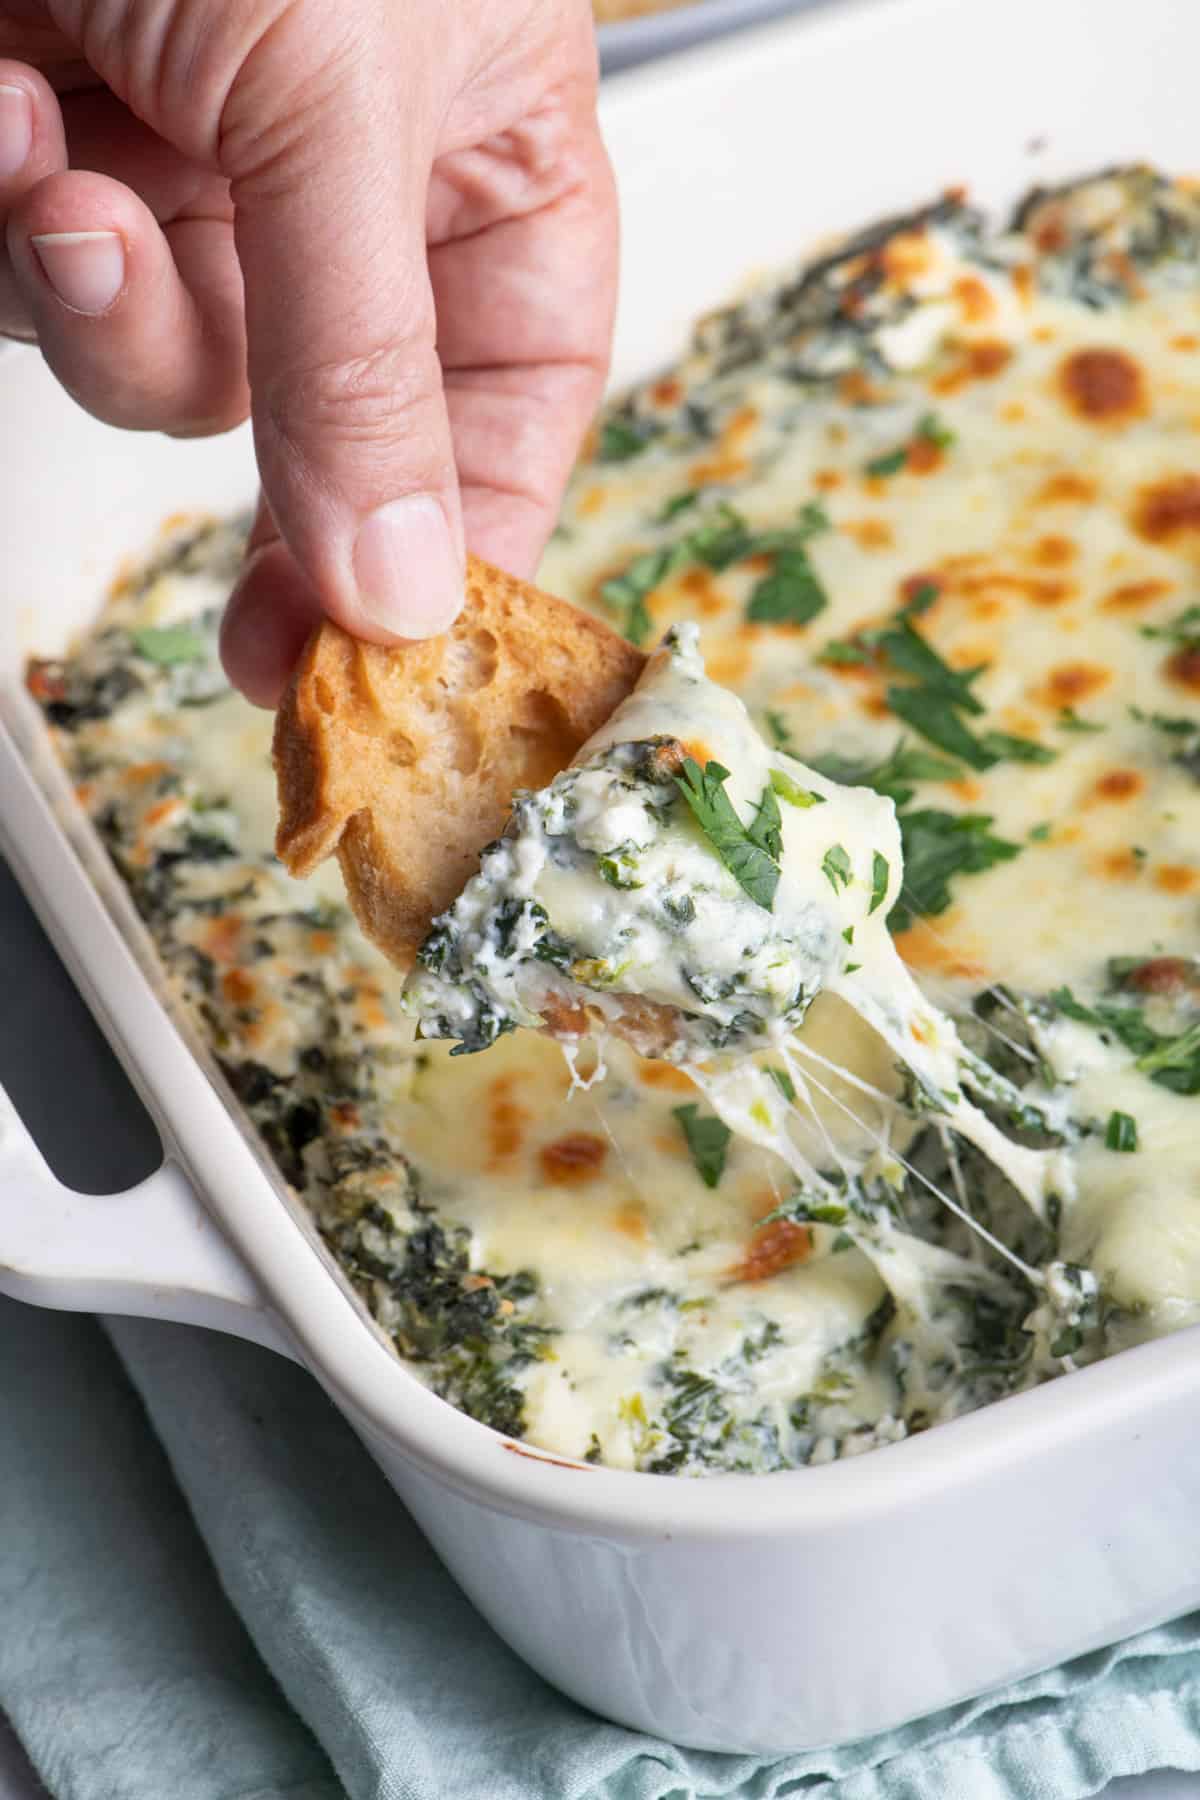 This Skinny Spinach Dip is a rich creamy dip that uses cottage cheese instead of sour cream. As compared to sour cream, cottage cheese has less fat and more protein making it a healthy substitute that doesn't sacrifice on the texture or the taste. This is a wonderful dip to serve with vegetables, toast or crackers!